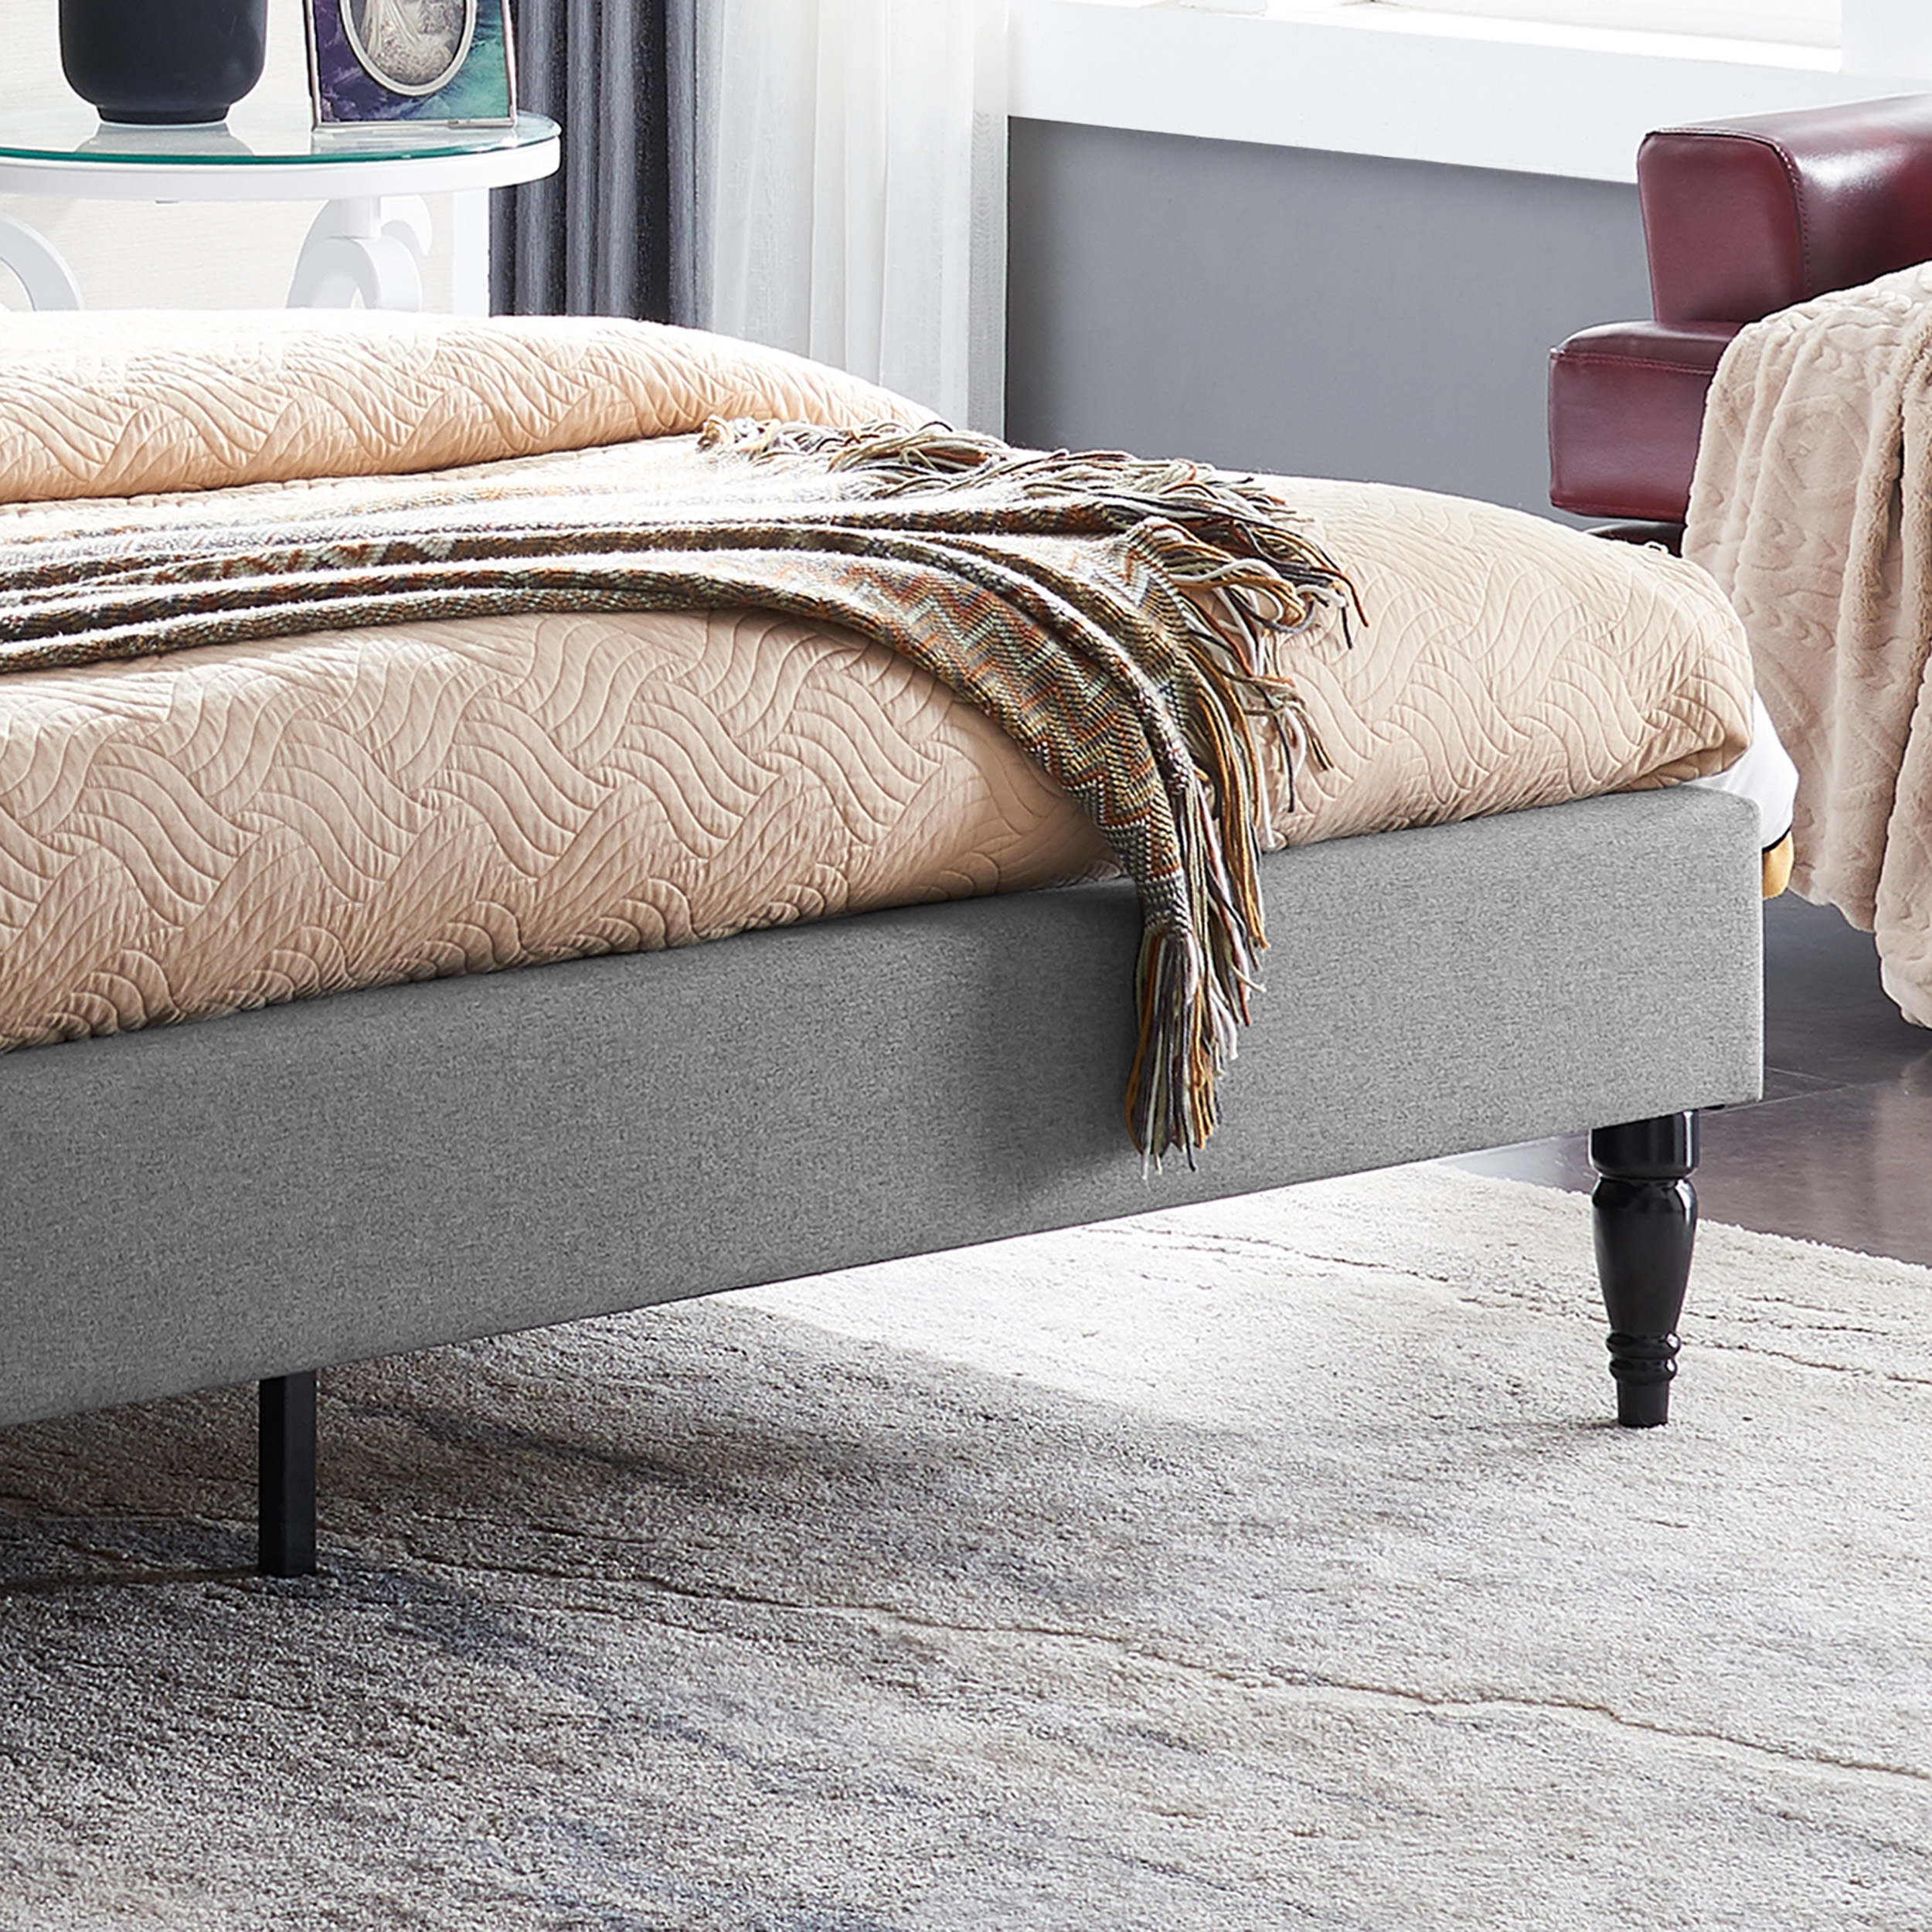 GDF Studio Vallarta Contemporary Fabric Upholstered Tufted Bed, Charcoal Gray and Black King - image 4 of 13